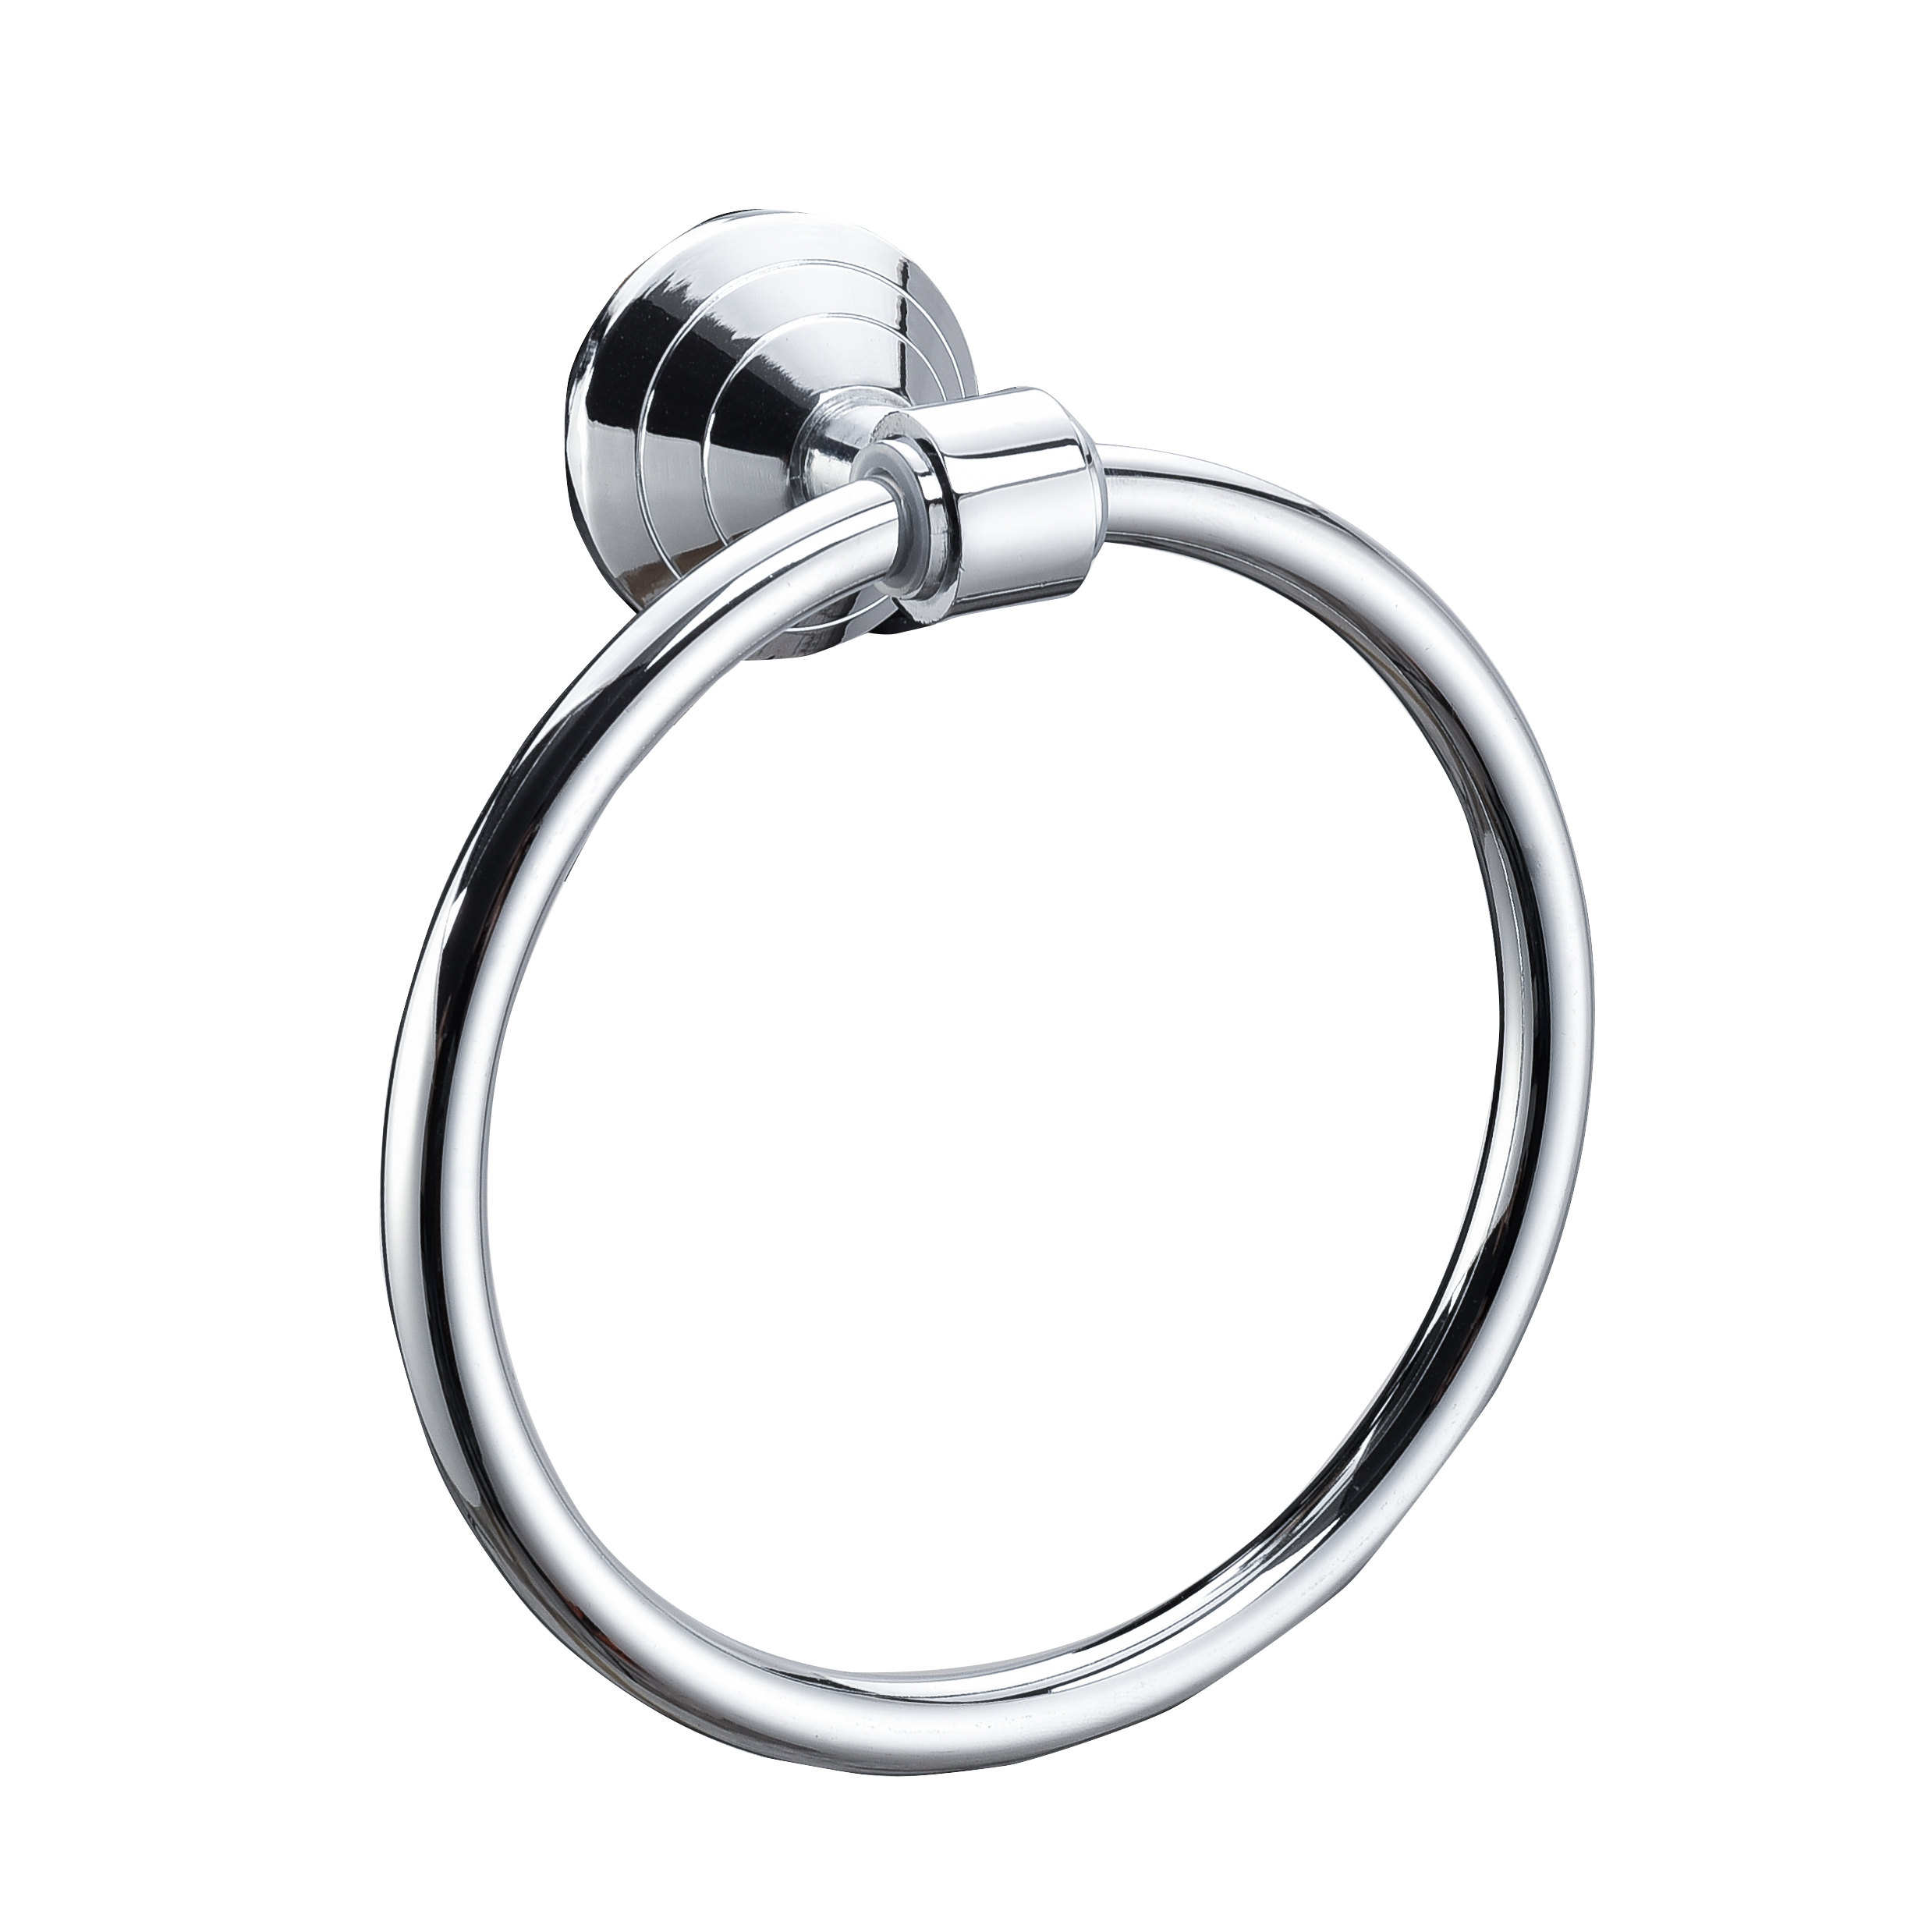 Chinese Professional Towel Holder Ring Towel Ring - Bathroom Zinc Wall Mounted towel Holder Chrome Brushed Towel Ring 13207 – Bodi